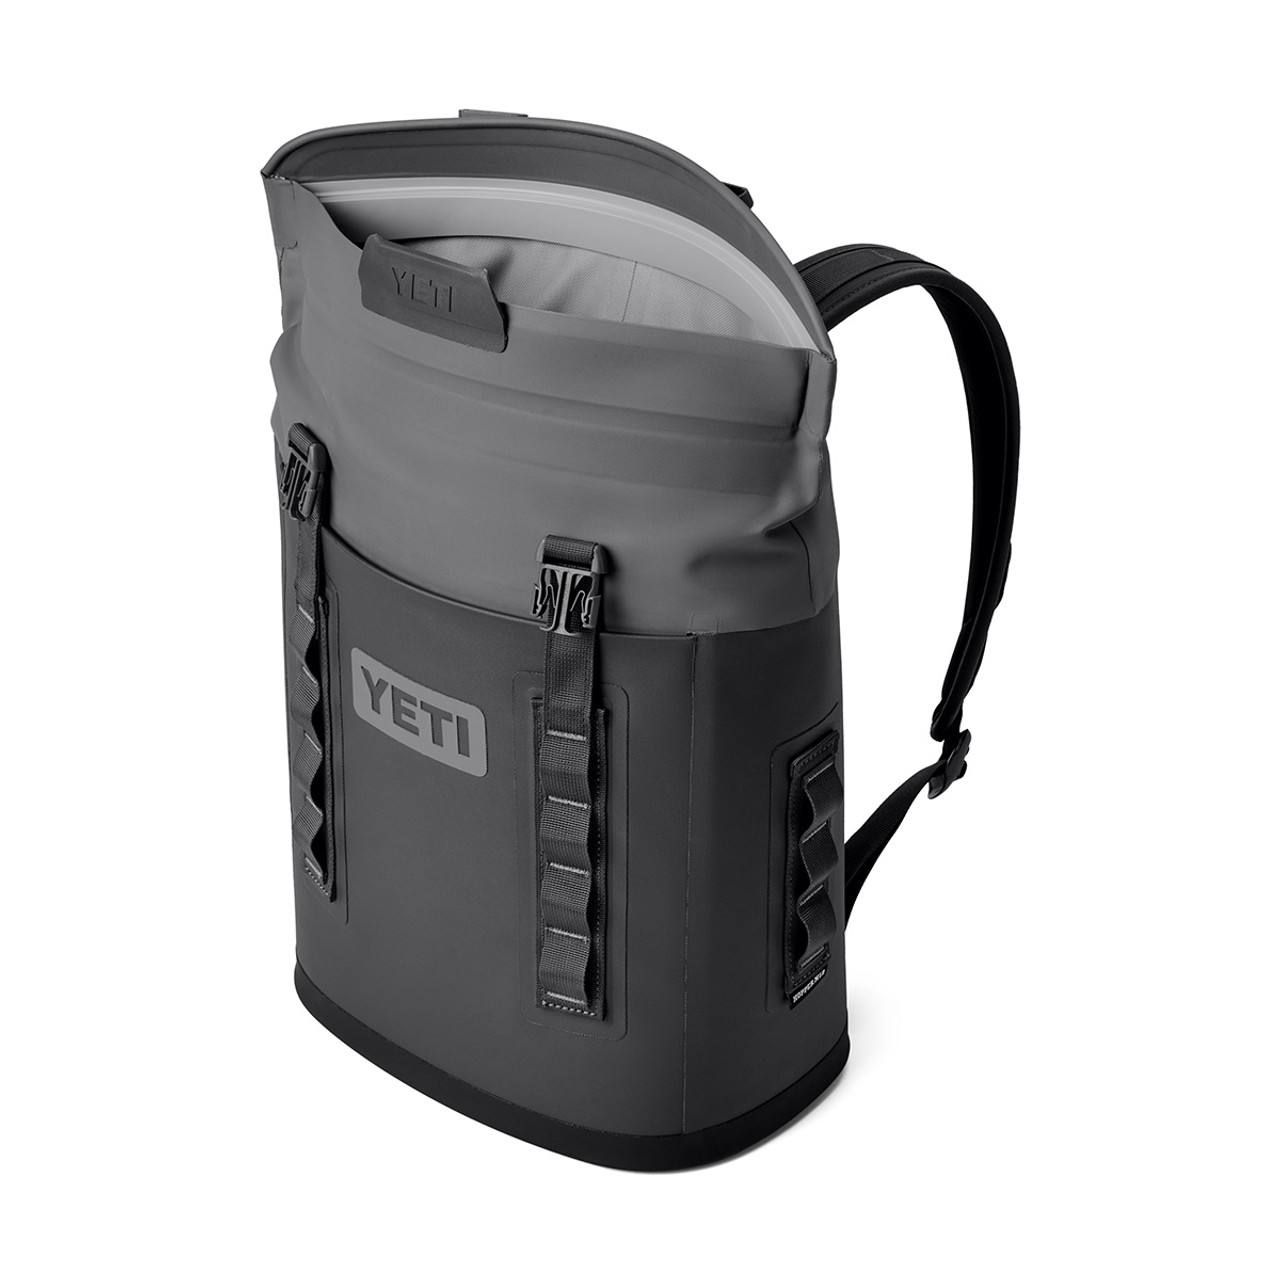 Yeti Hopper BackFlip 24 ColdCell Wide-Mouth Opening Insulation Soft Cooler